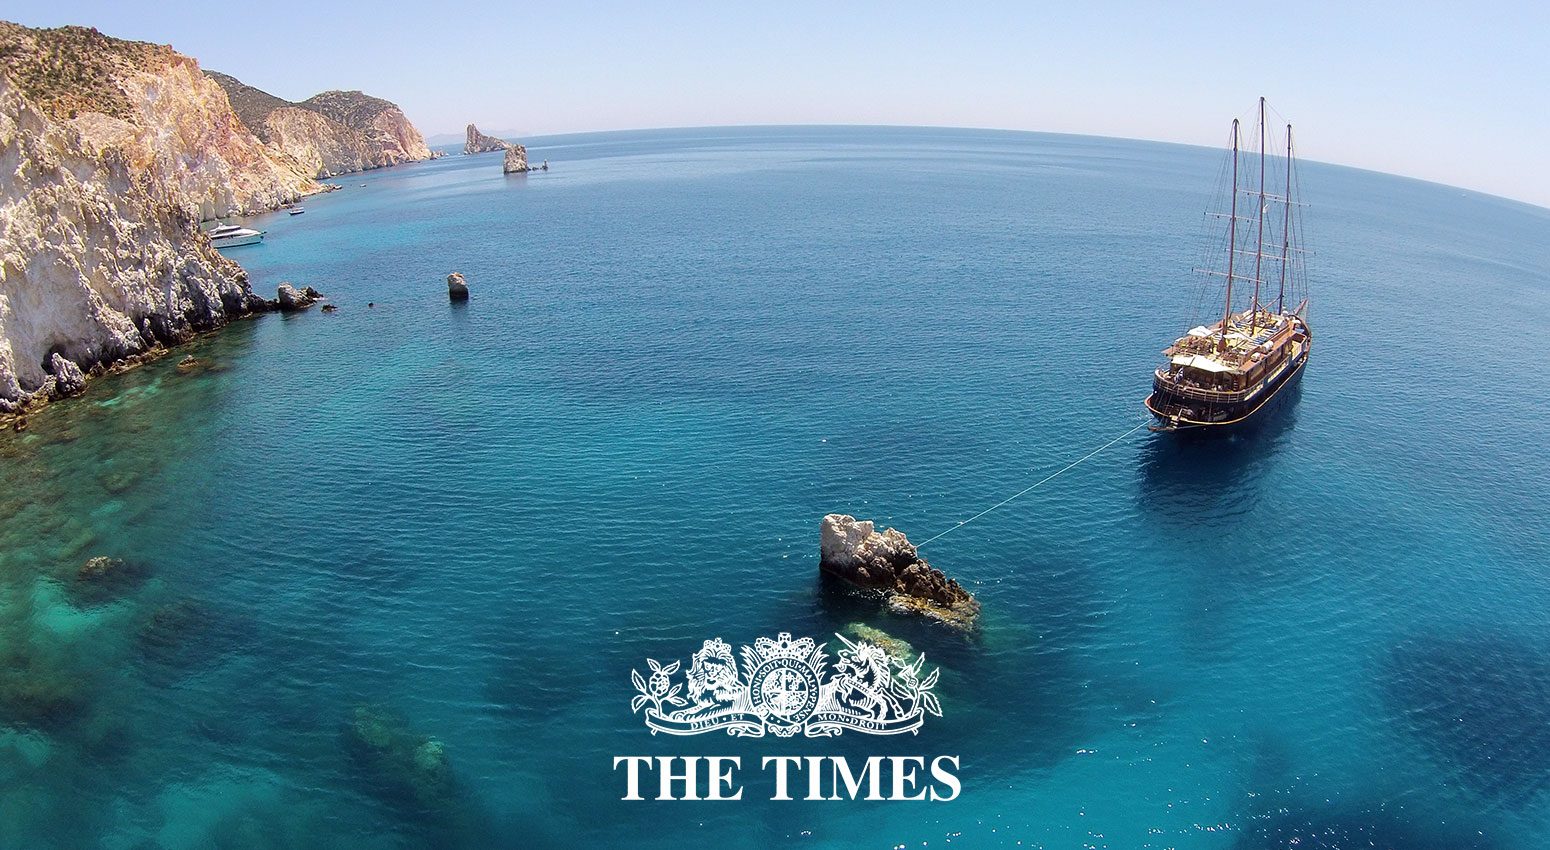 Variety Cruises named Best Cruise Line in the Times UK, a panoramic view to anchored Variety Cruises ship with rocky mountains in the background in Milos Island